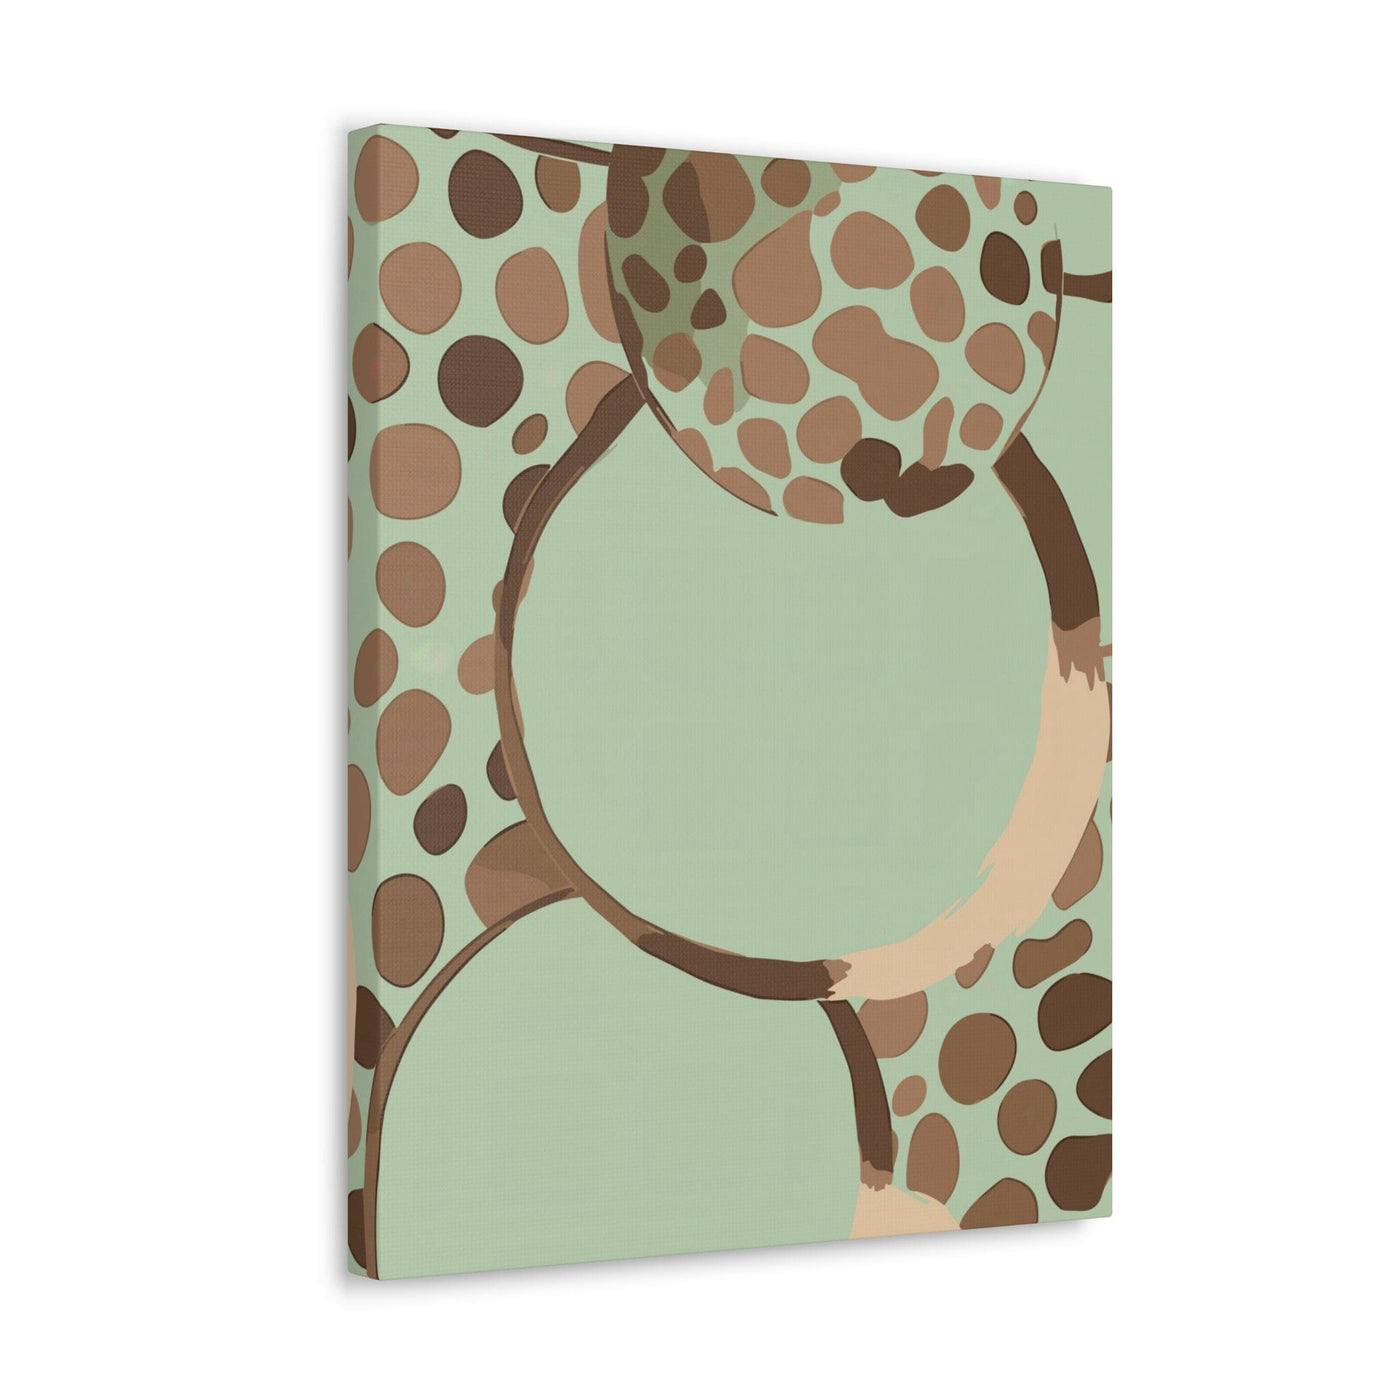 Wall Art Decor Canvas Print Artwork Mint Green And Brown Spotted Illustration